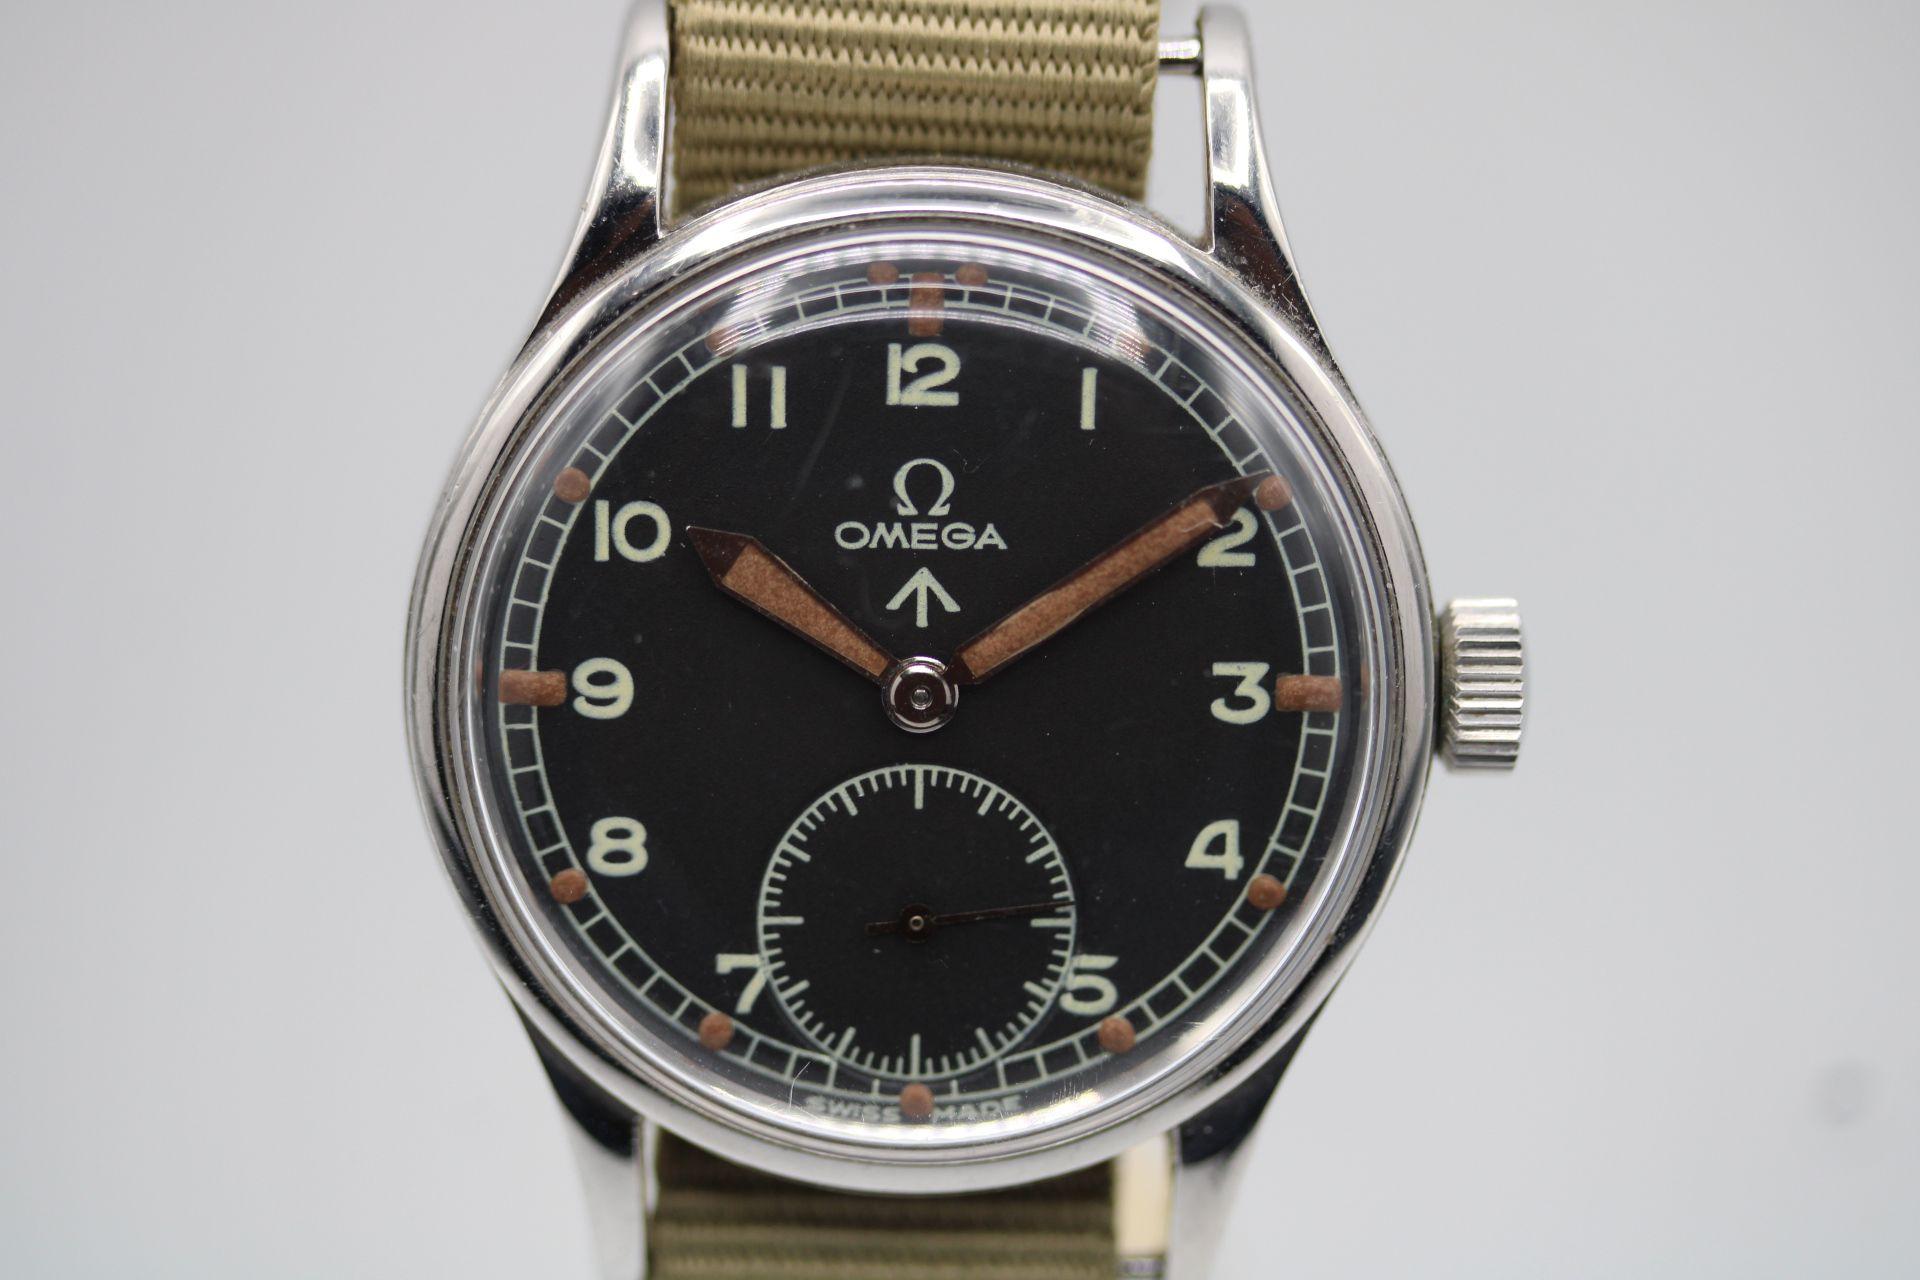 Part of the well know and well collected 'Dirty Dozen' collection of British military watches from WW2. The Omega being one of the 12 brands the Ministry of Defence contracted to supply watches to be used by Military personal throughout the war.